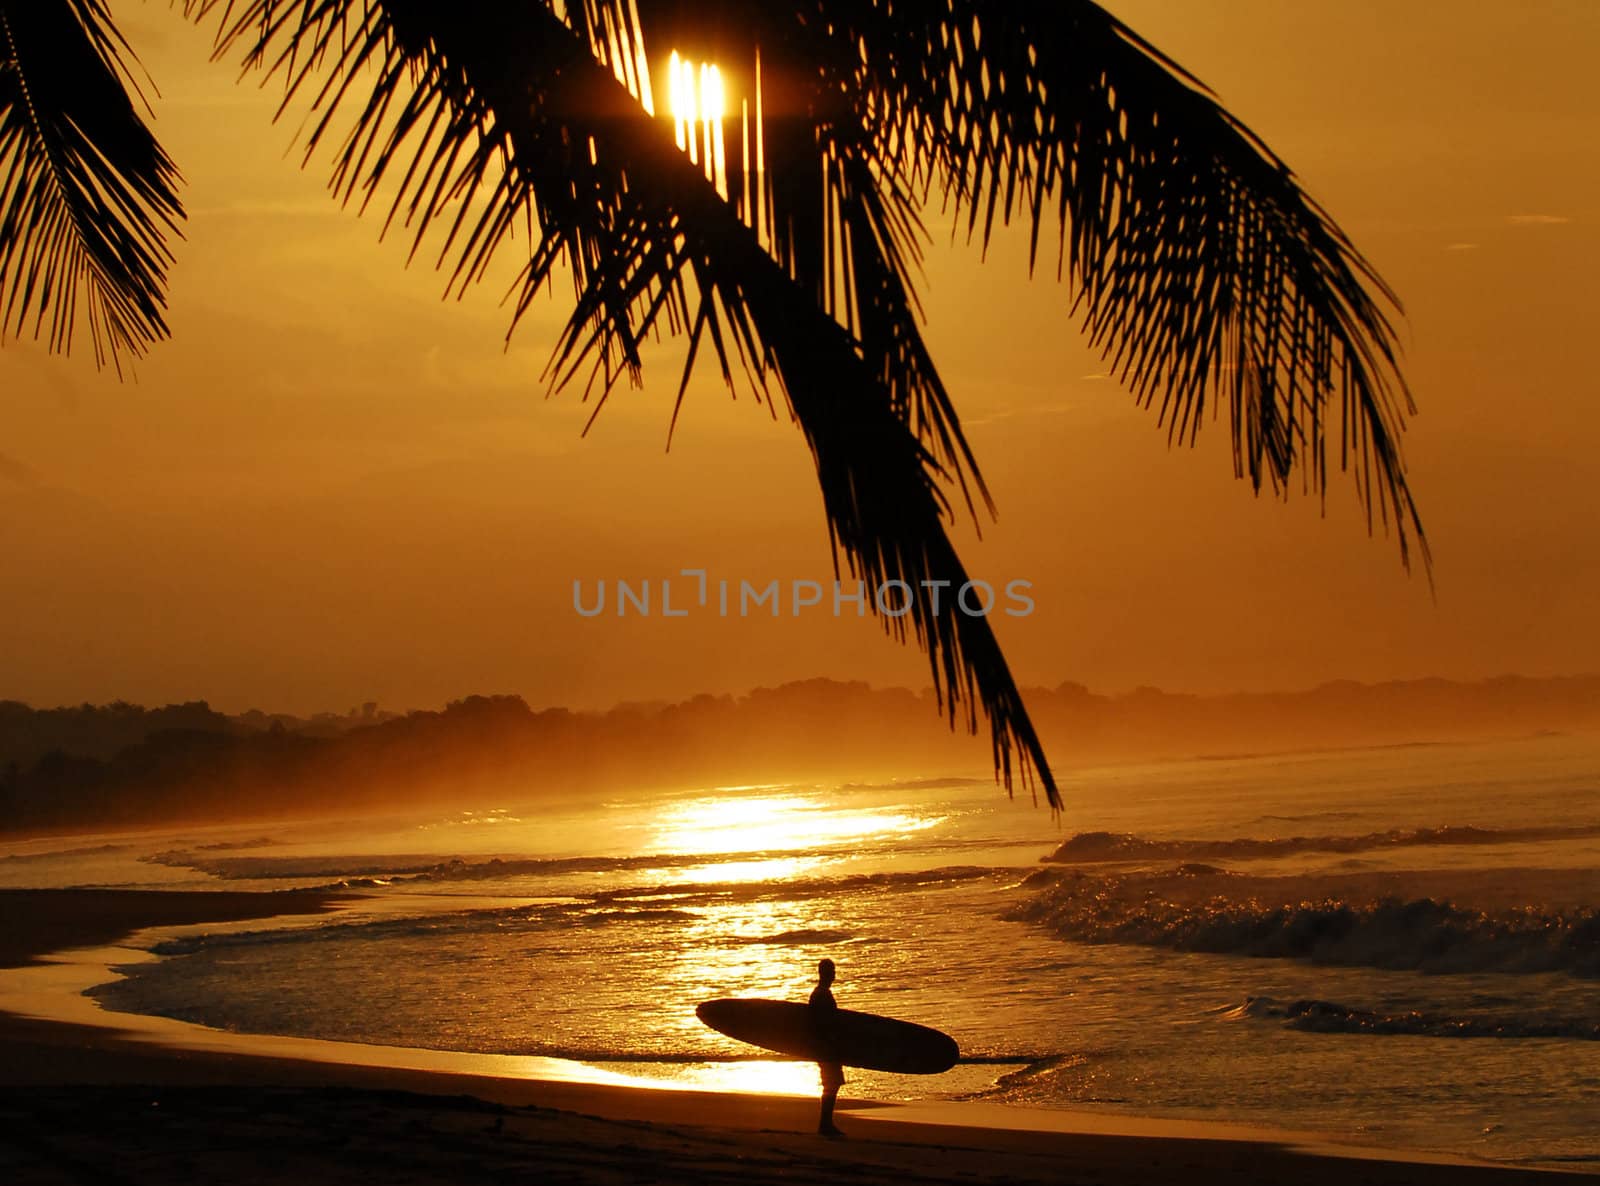 Susnet in tropical location with surfer by ftlaudgirl